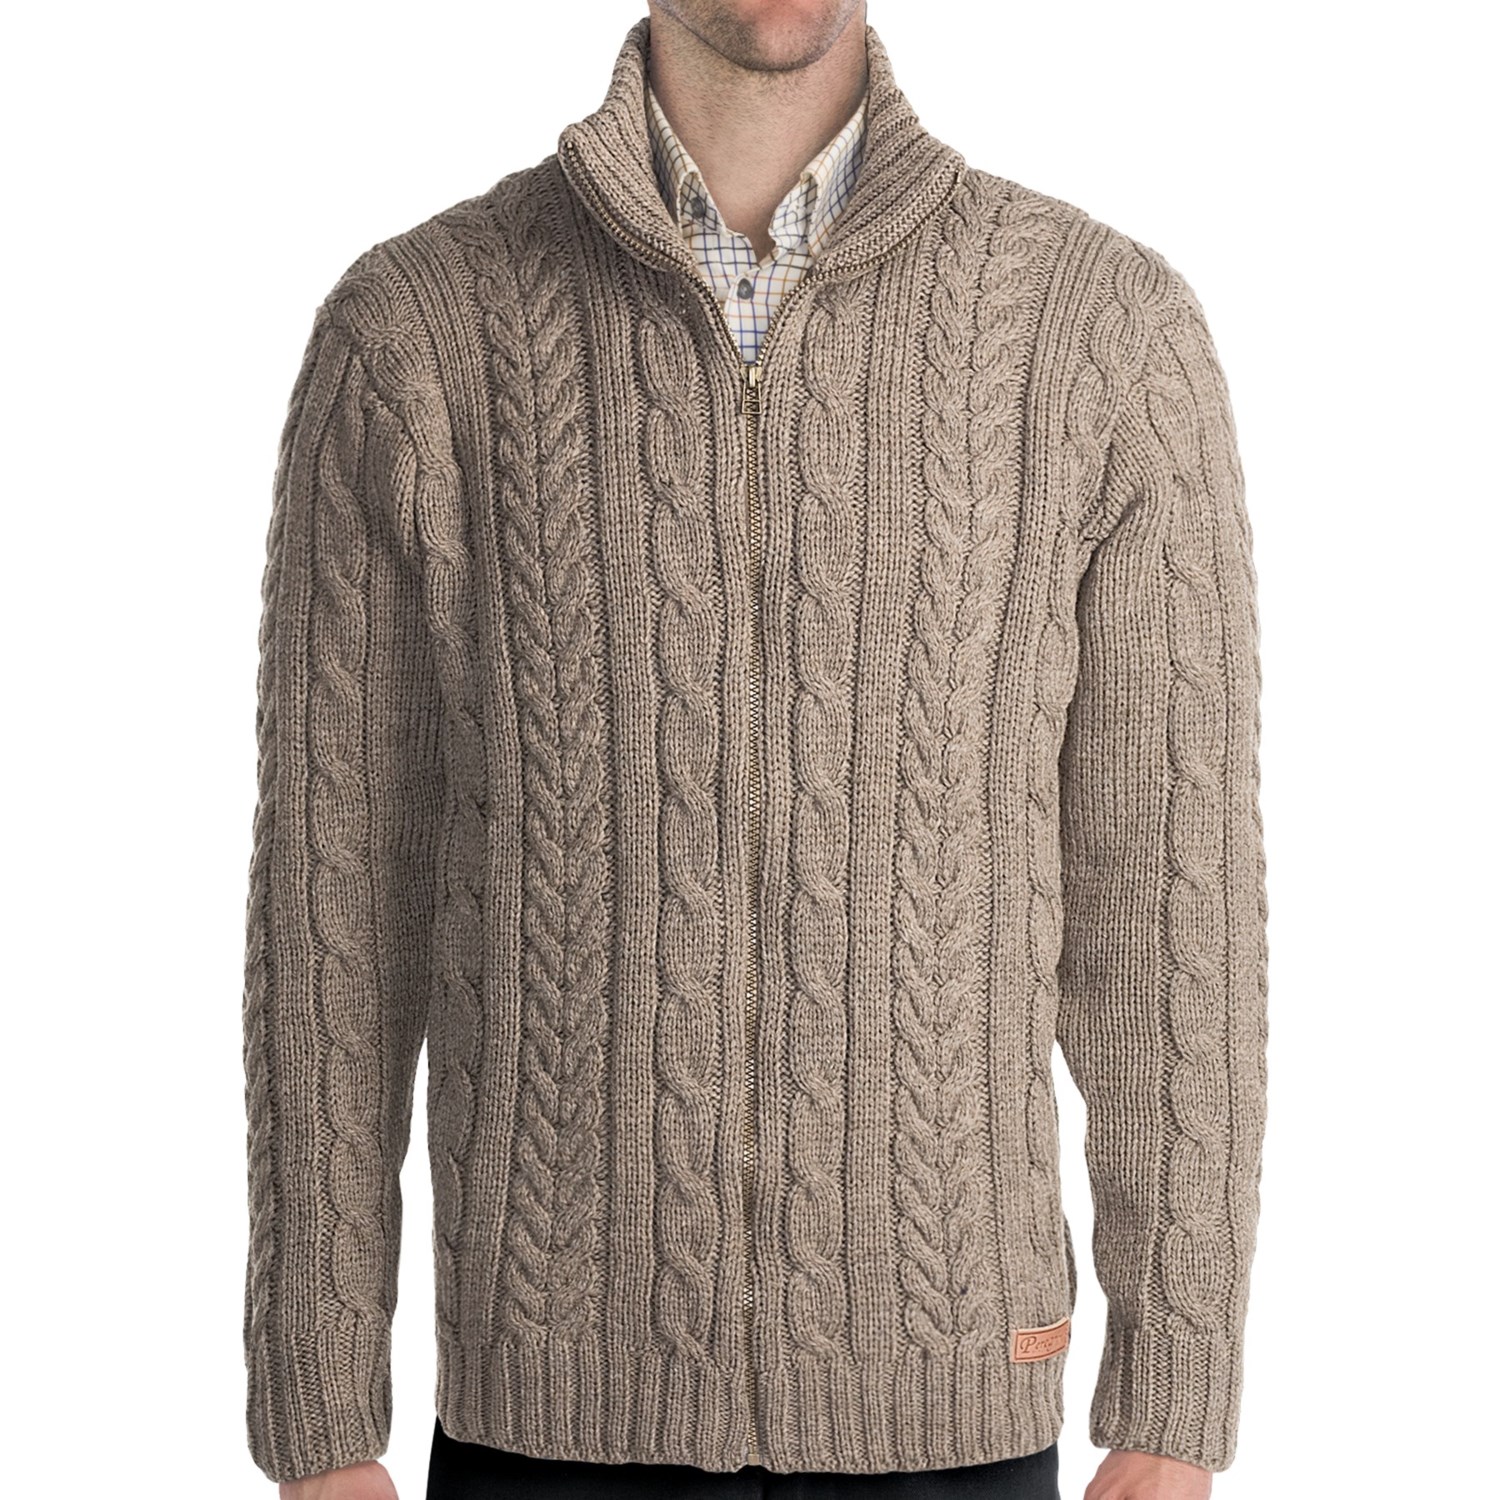 Peregrine by J. G. Glover Chunky Cable Sweater - Merino Wool, Full Zip ...